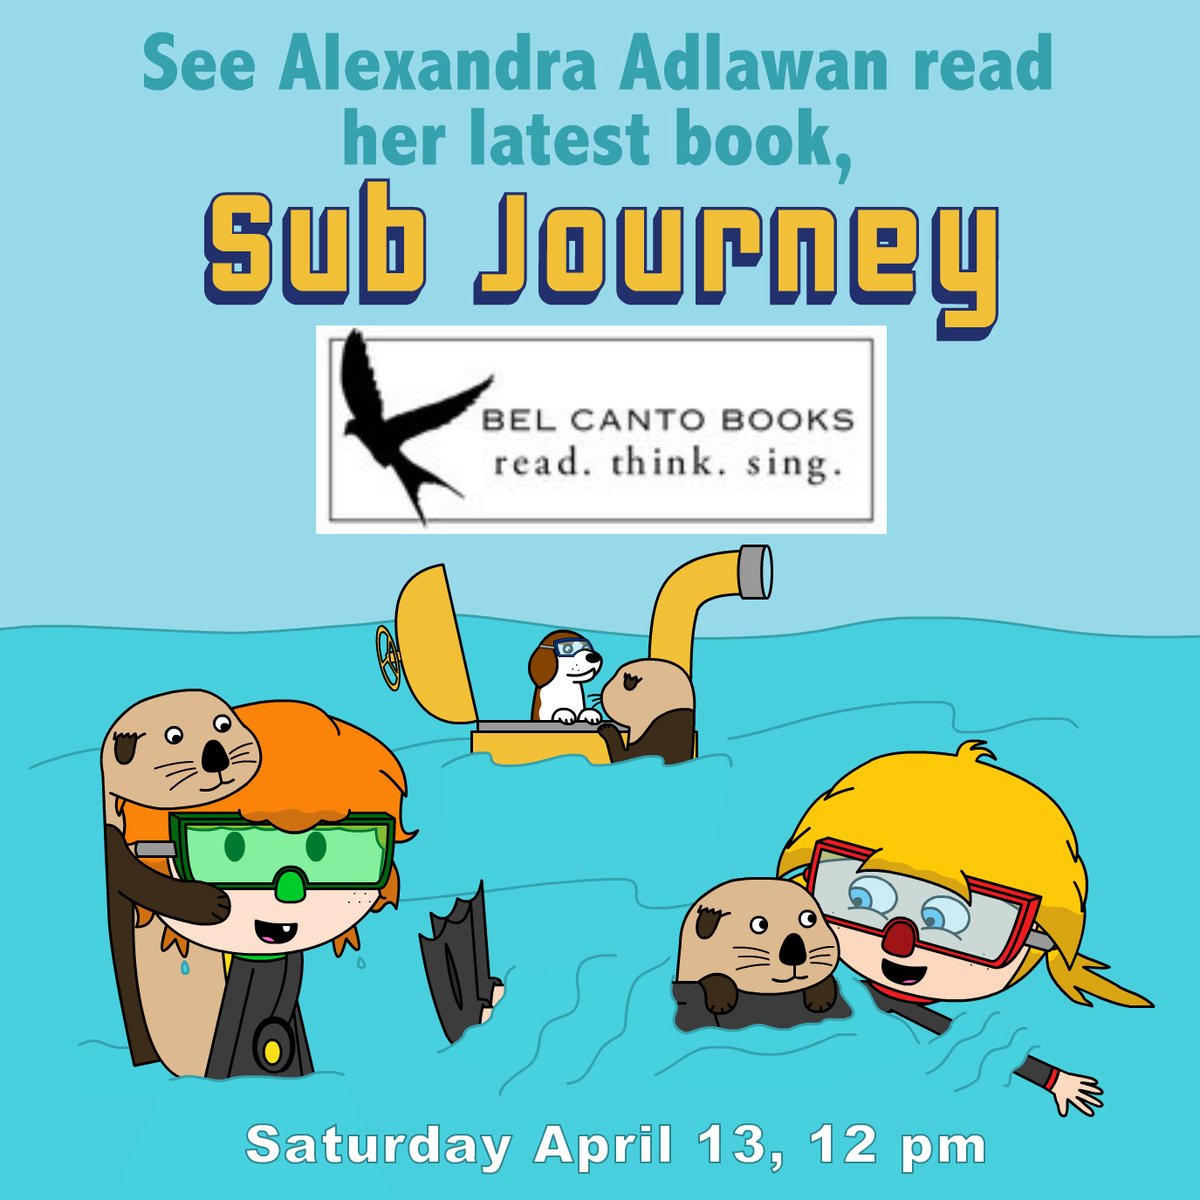 Come join me at Bel Canto Books on Saturday, April 13, at 12:00 p.m. for a reading of my latest book, Sub Journey: The Adventures of Maddie and Albert
#alexandraadlawan #bookreadingevent #belcantobooks  #maddieandalbert #childrensbooks #authorillustrator